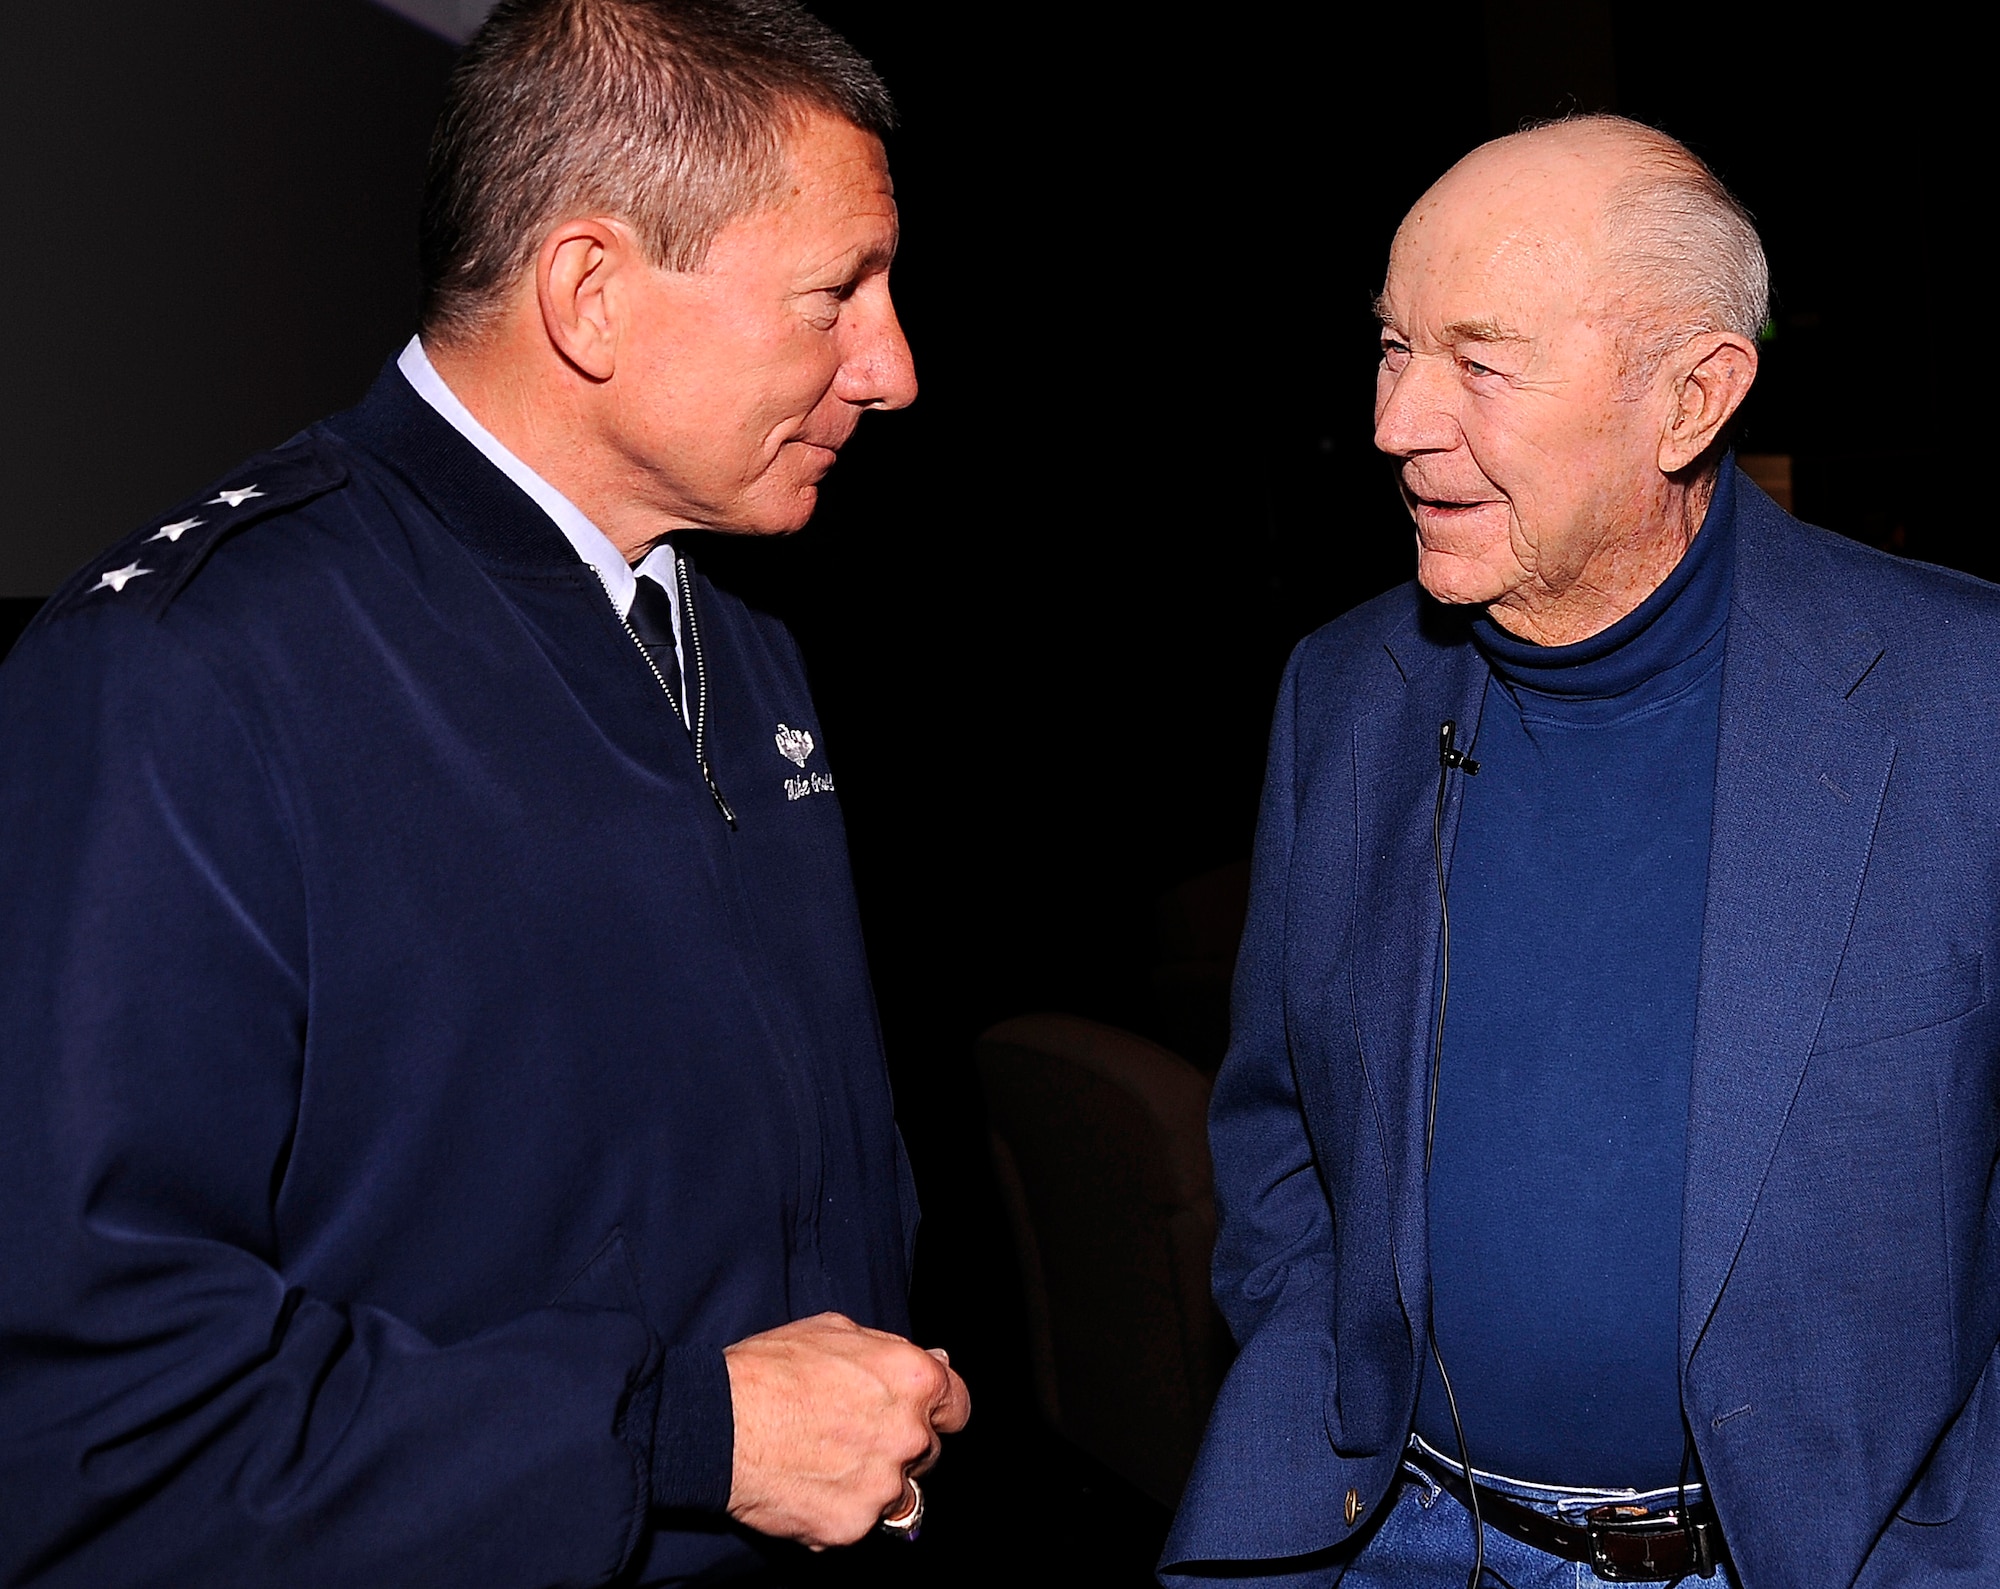 Air Force Academy Superintendent Lt. Gen. Mike Gould speaks with retired Brig. Gen. Chuck Yeager before Yeager's National Character and Leadership Symposium presentation Feb. 22, 2013. Yeager, who enlisted into the Army Air Corps in September 1941, made history six years later with the Air Force's first supersonic flight. (U.S. Air Force photo/Mike Kaplan)